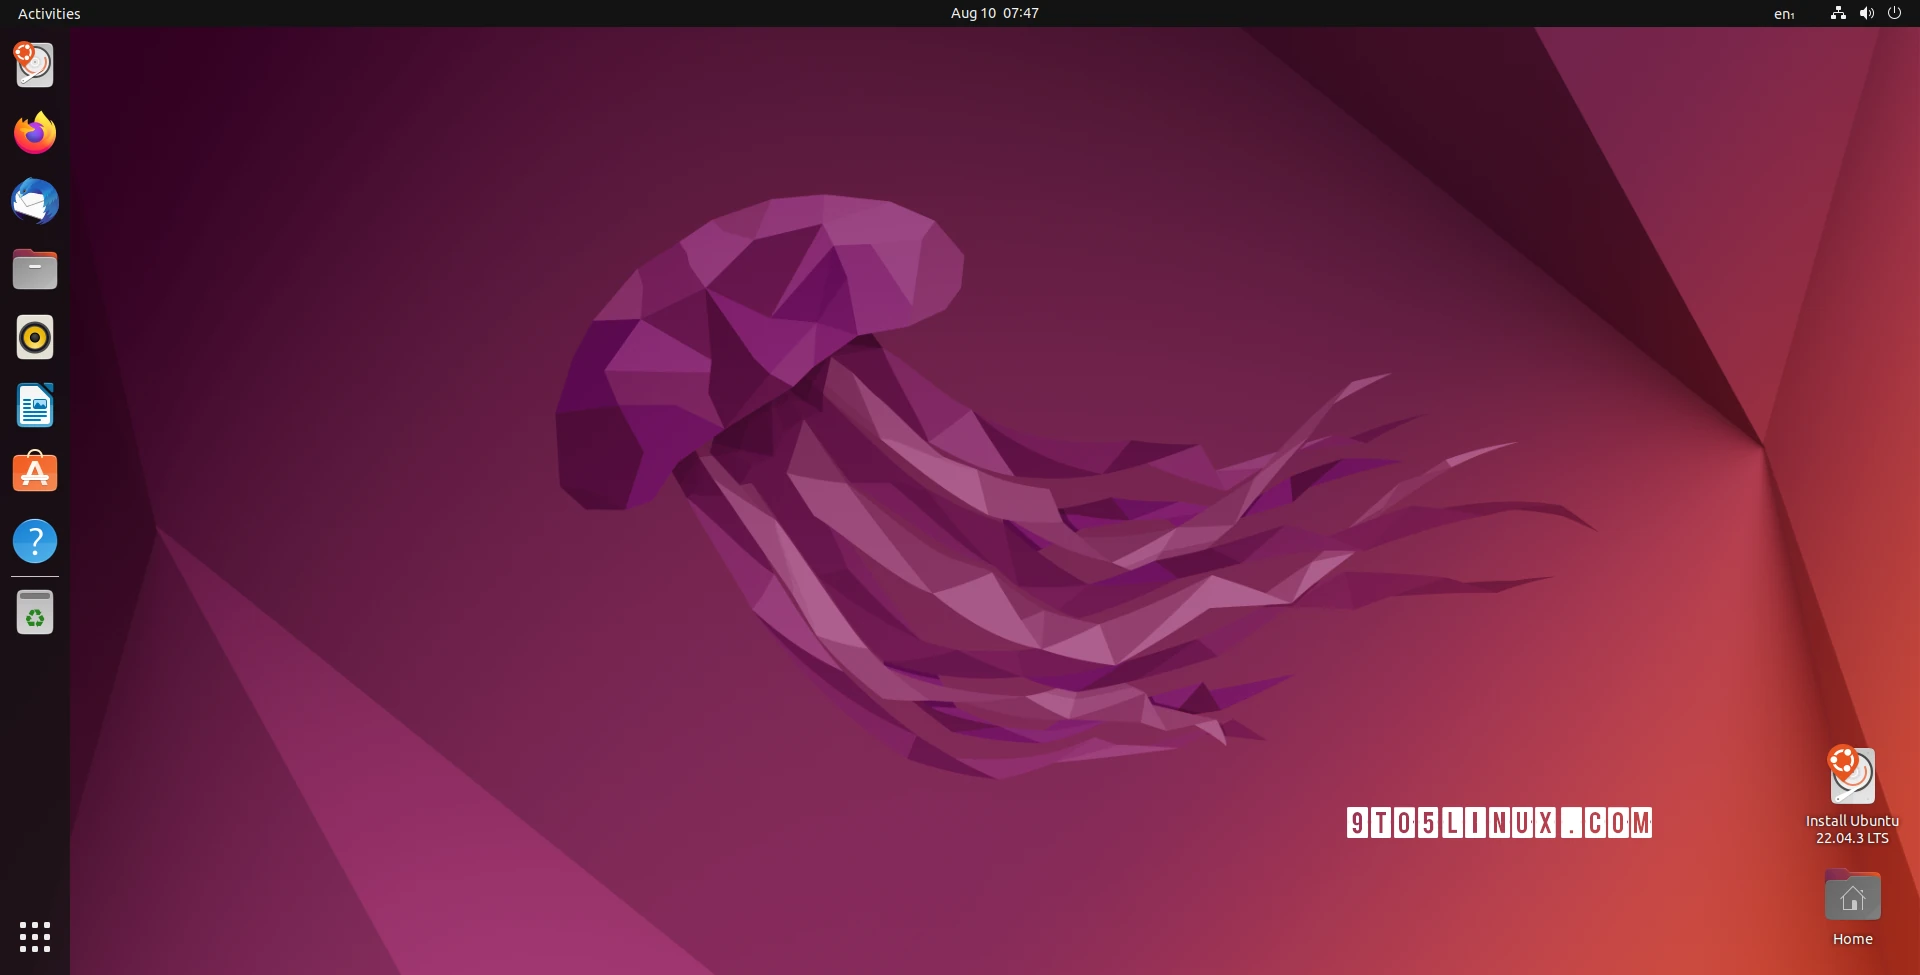 Ubuntu 22.04.3 LTS Released with Linux 6.2 Kernel and Mesa 23.0 Graphics Stacks